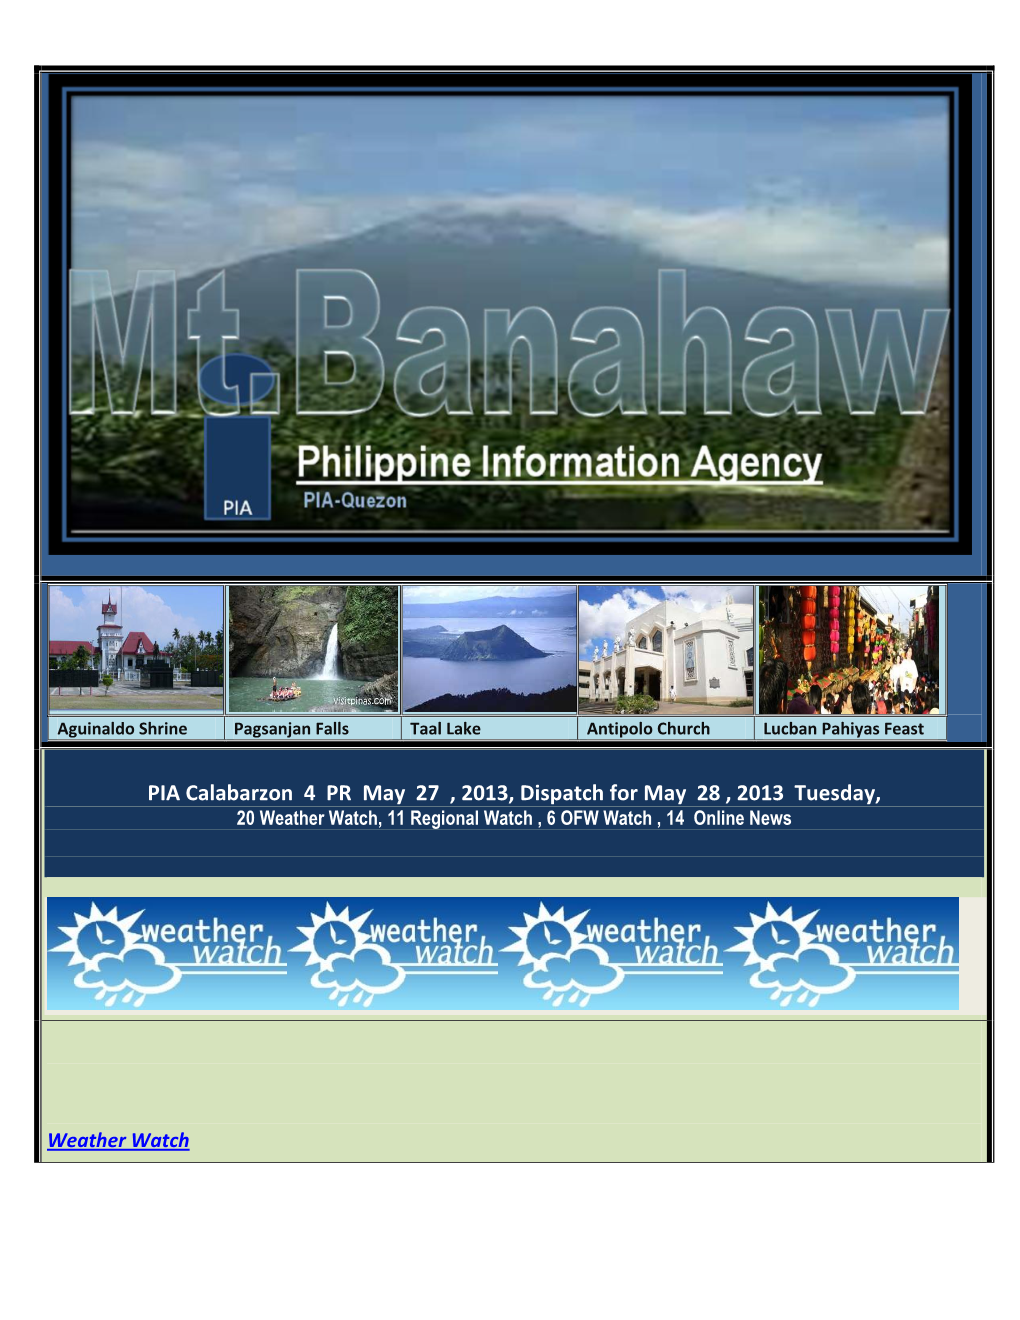 PIA Calabarzon 4 PR May 27 , 2013, Dispatch for May 28 , 2013 Tuesday, 20 Weather Watch, 11 Regional Watch , 6 OFW Watch , 14 Online News